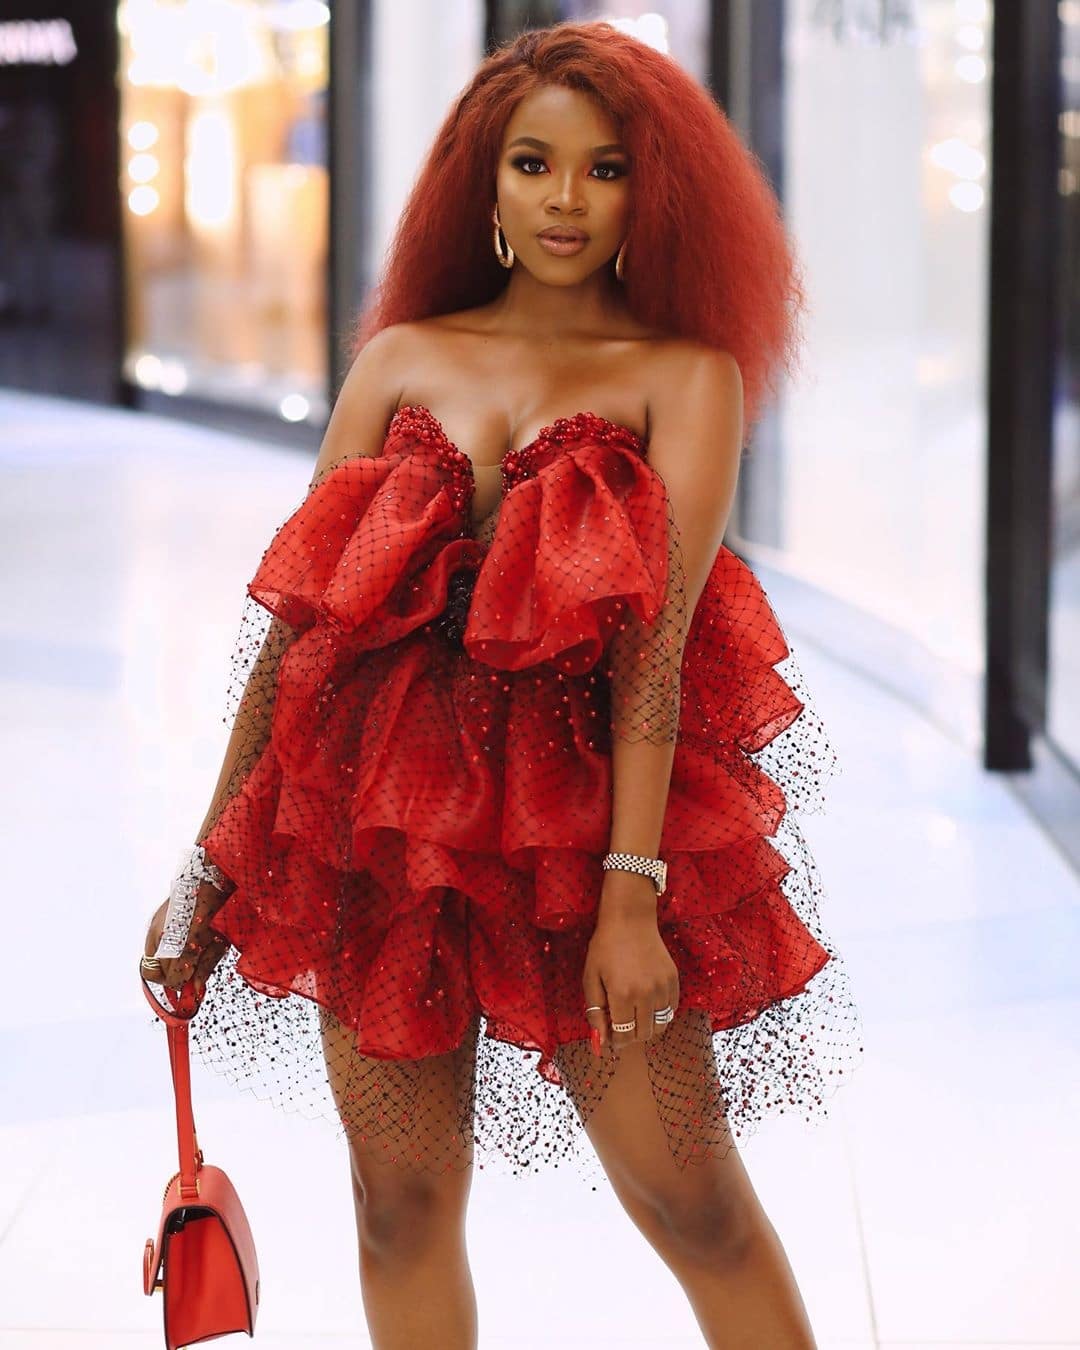 Melody-molale-south-africa-the-most-rave-worthy-looks-on-women-across-africa-african-celebs-style